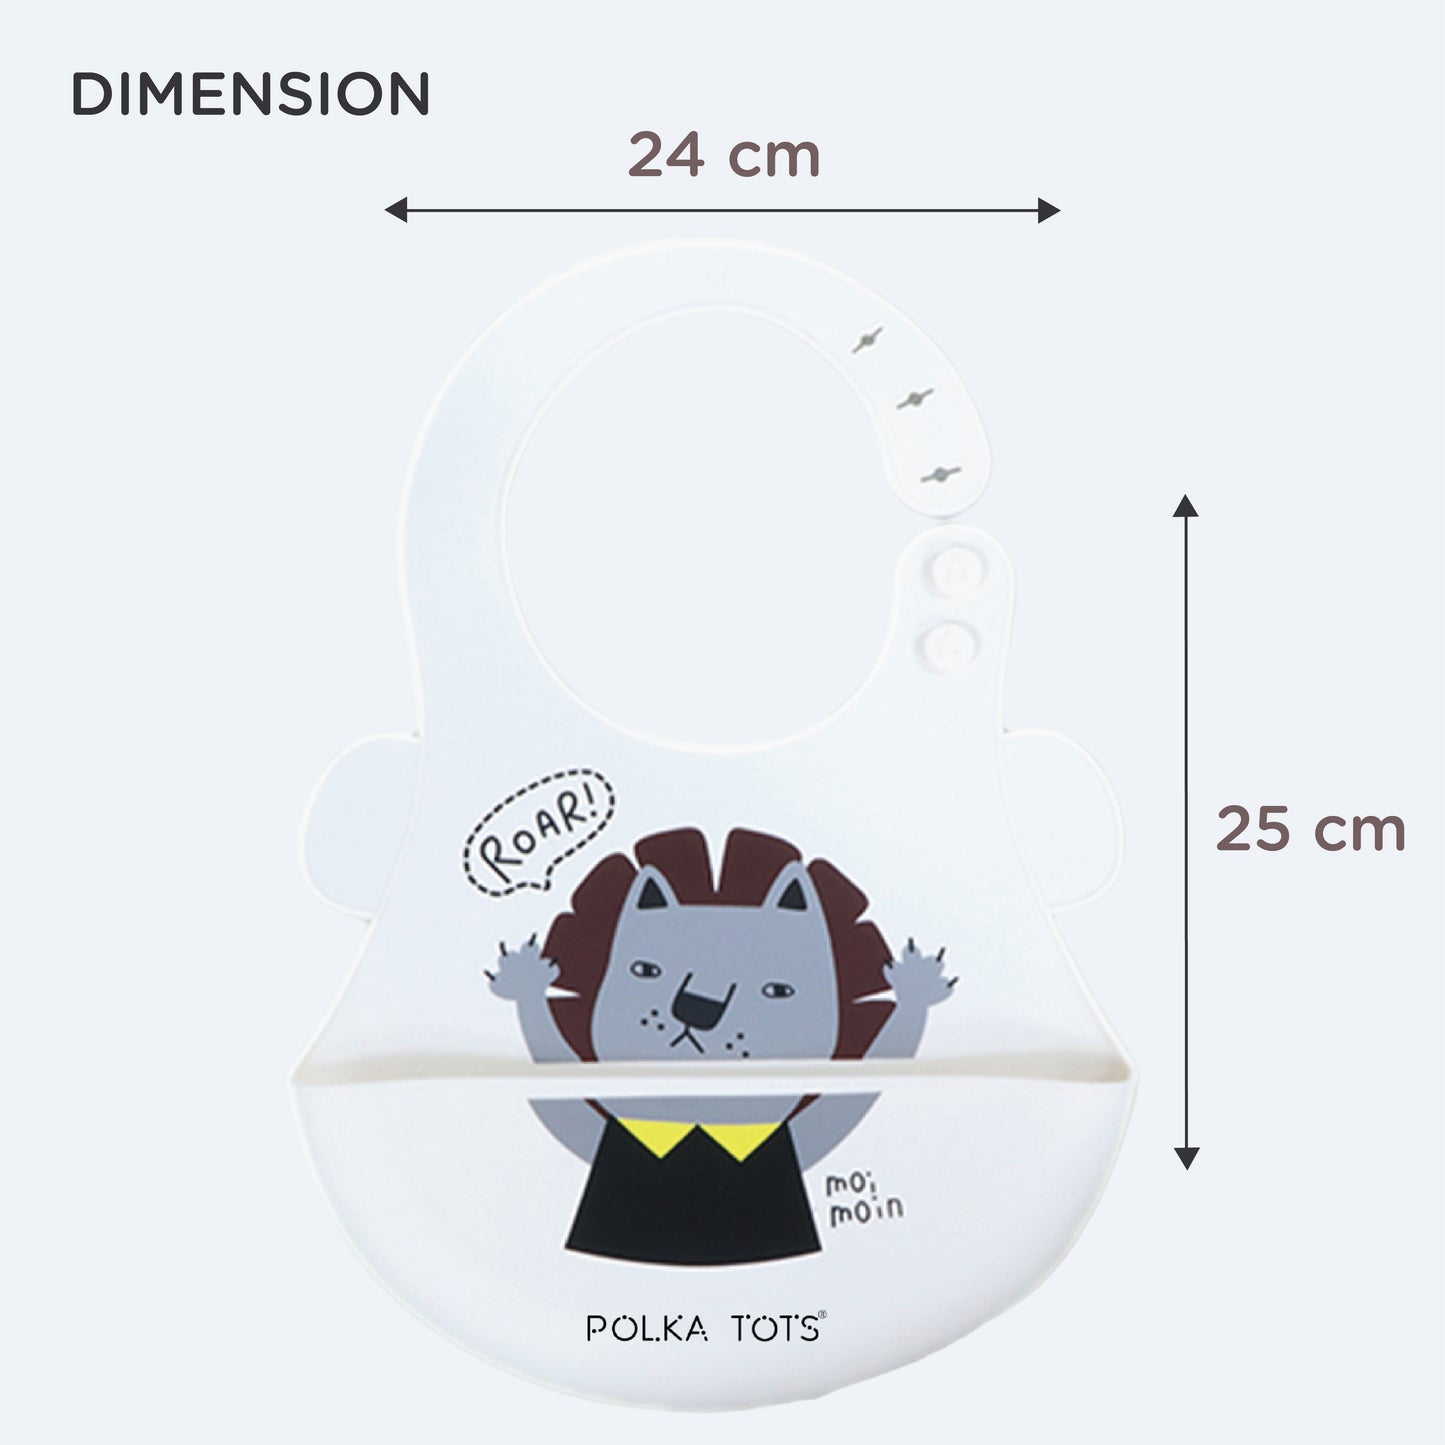 Polka Tots Waterproof Silicone Bibs with Pocket and Adjustable Snaps (White Lion)